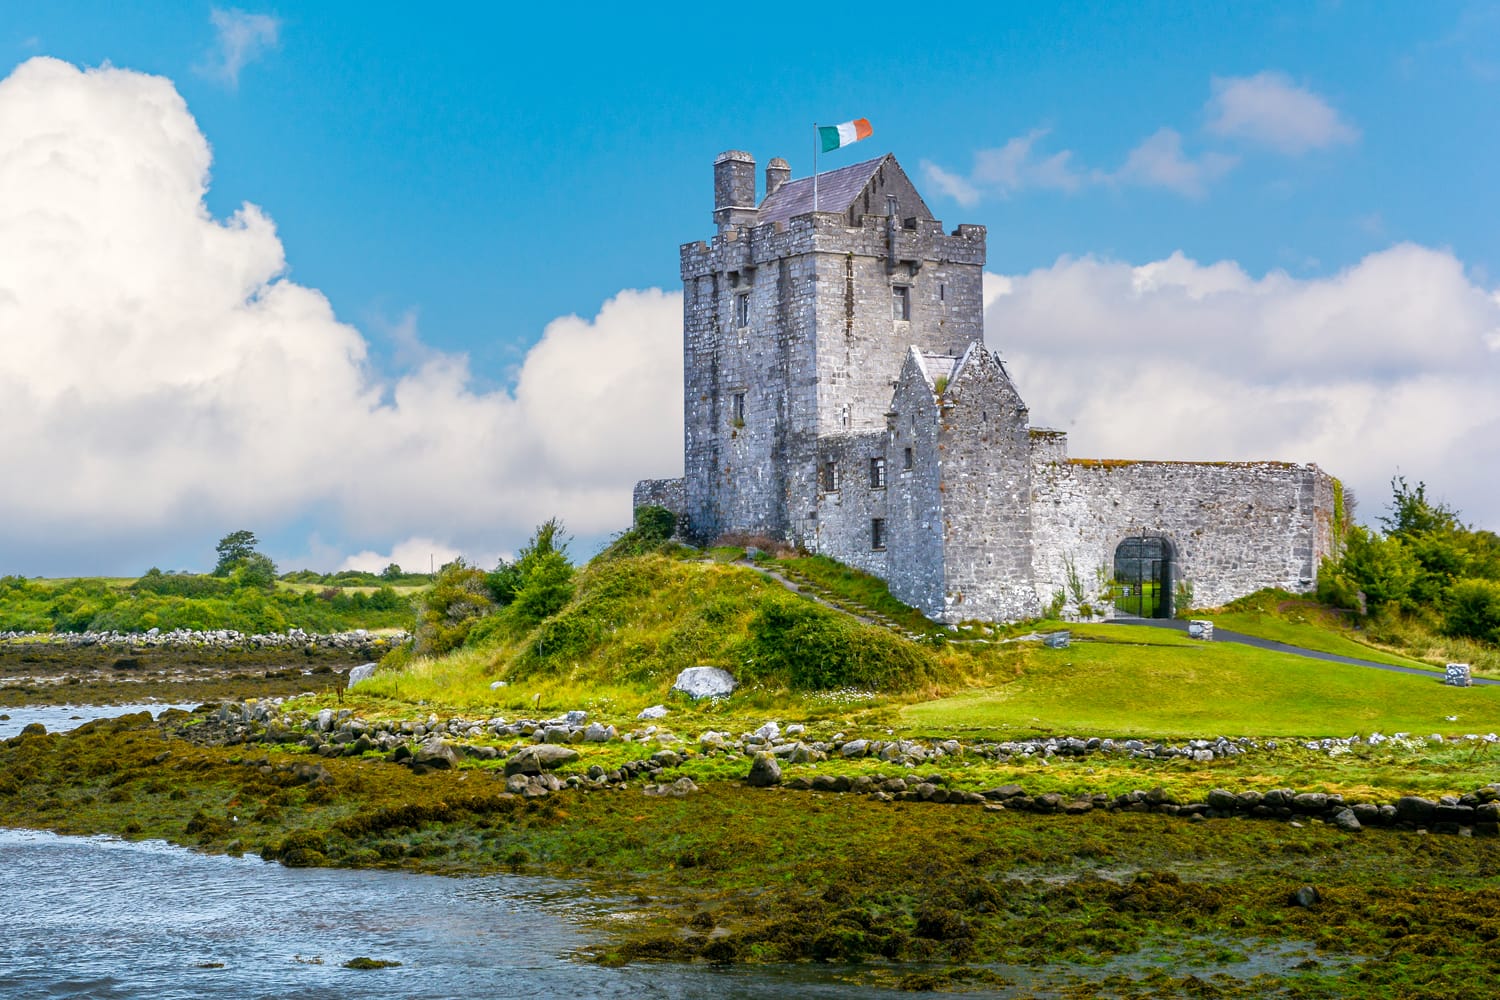 Dunguaire Castle, 16th-century tower house in County Galway near Kinvarra, Ireland